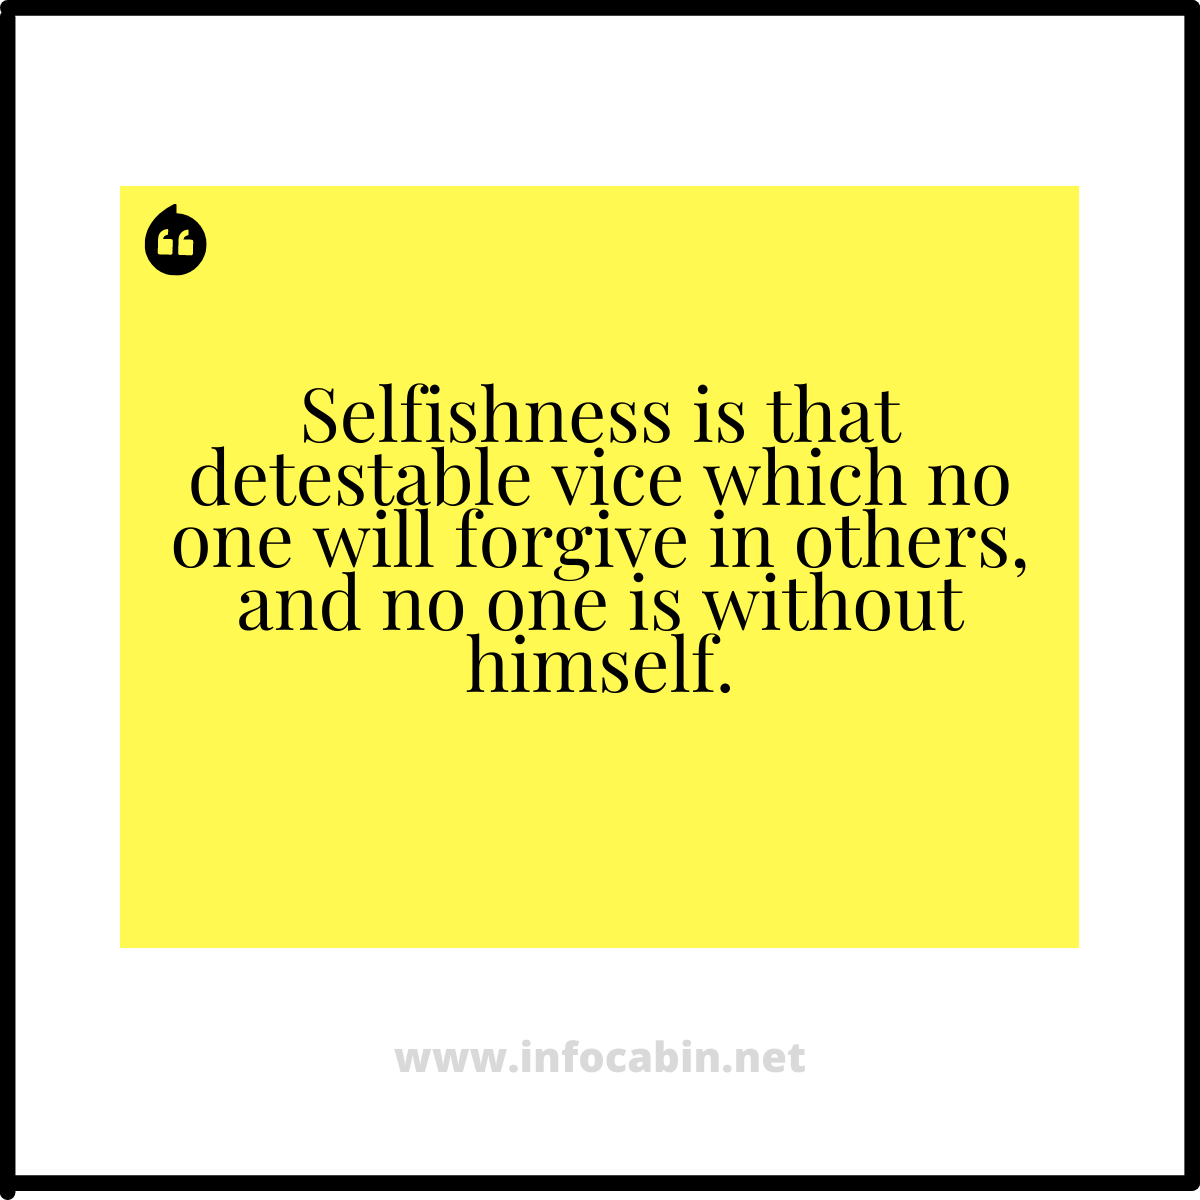 Selfishness is that detestable vice which no one will forgive in others, and no one is without himself.